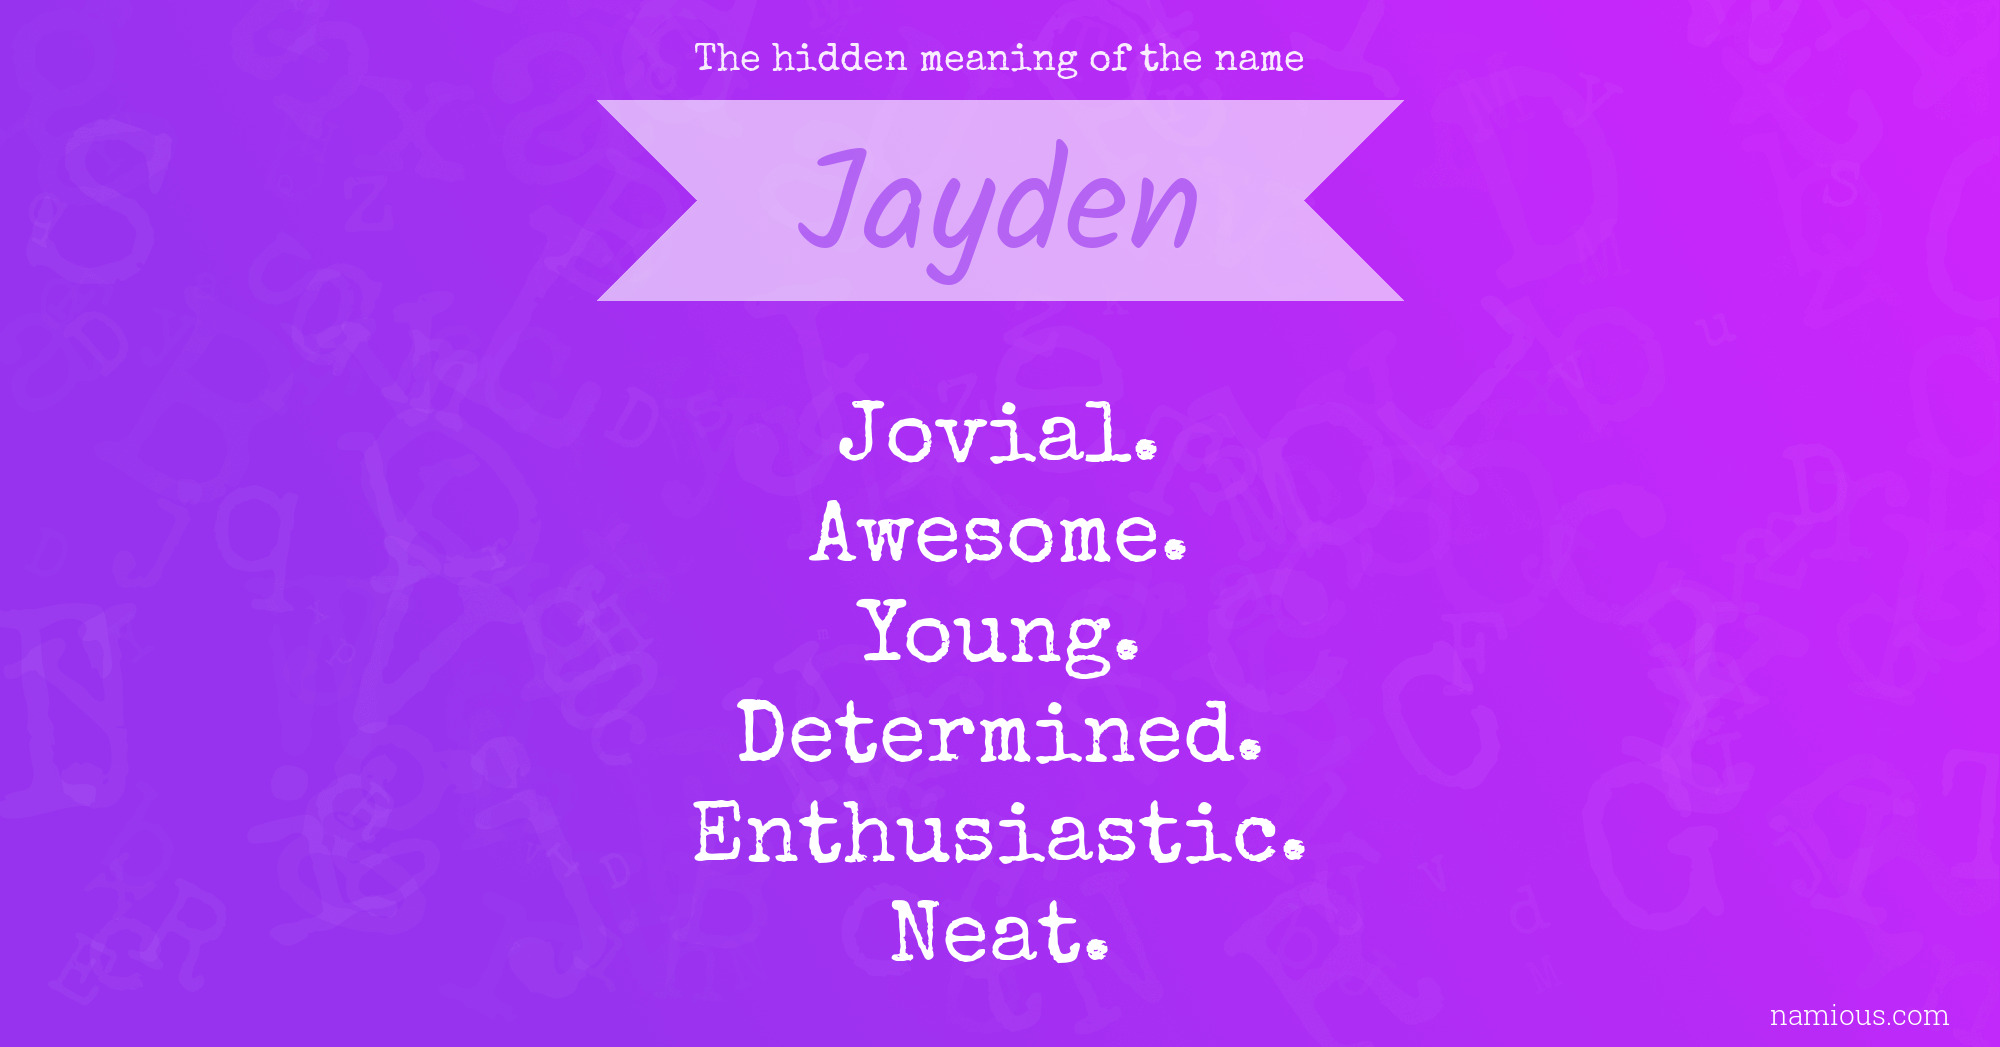 The hidden meaning of the name Jayden